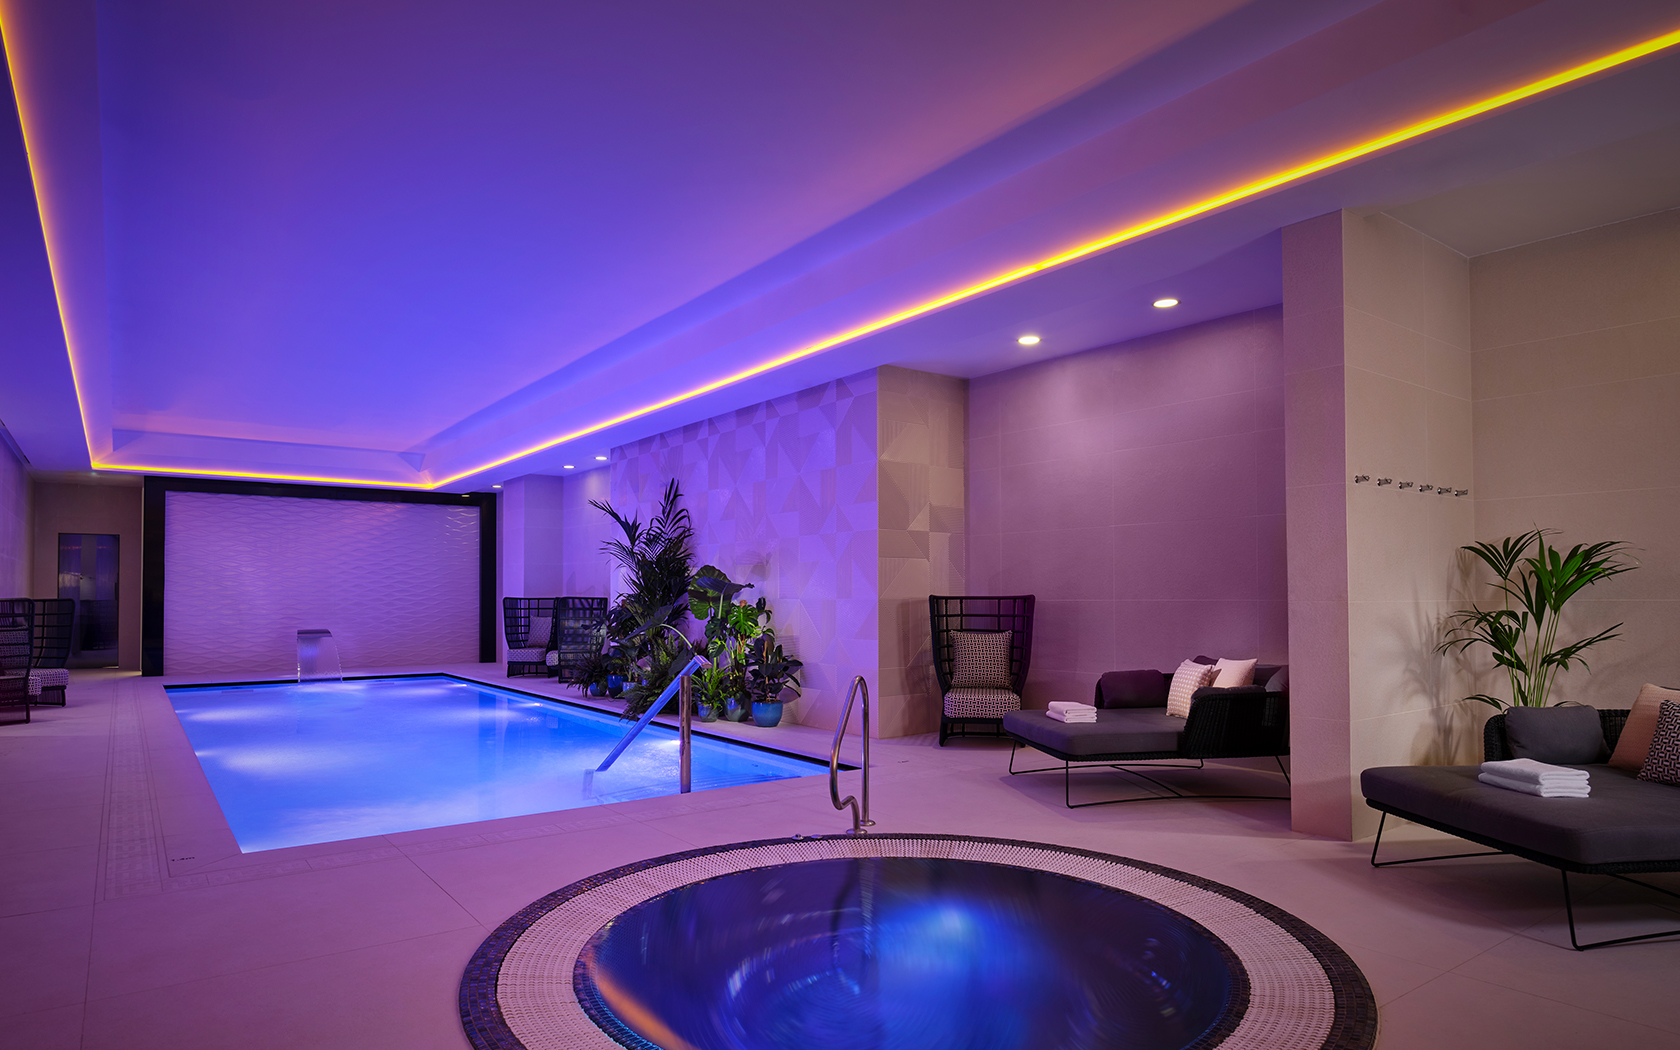 indoor circular hot tub next to pool and lounge chairs